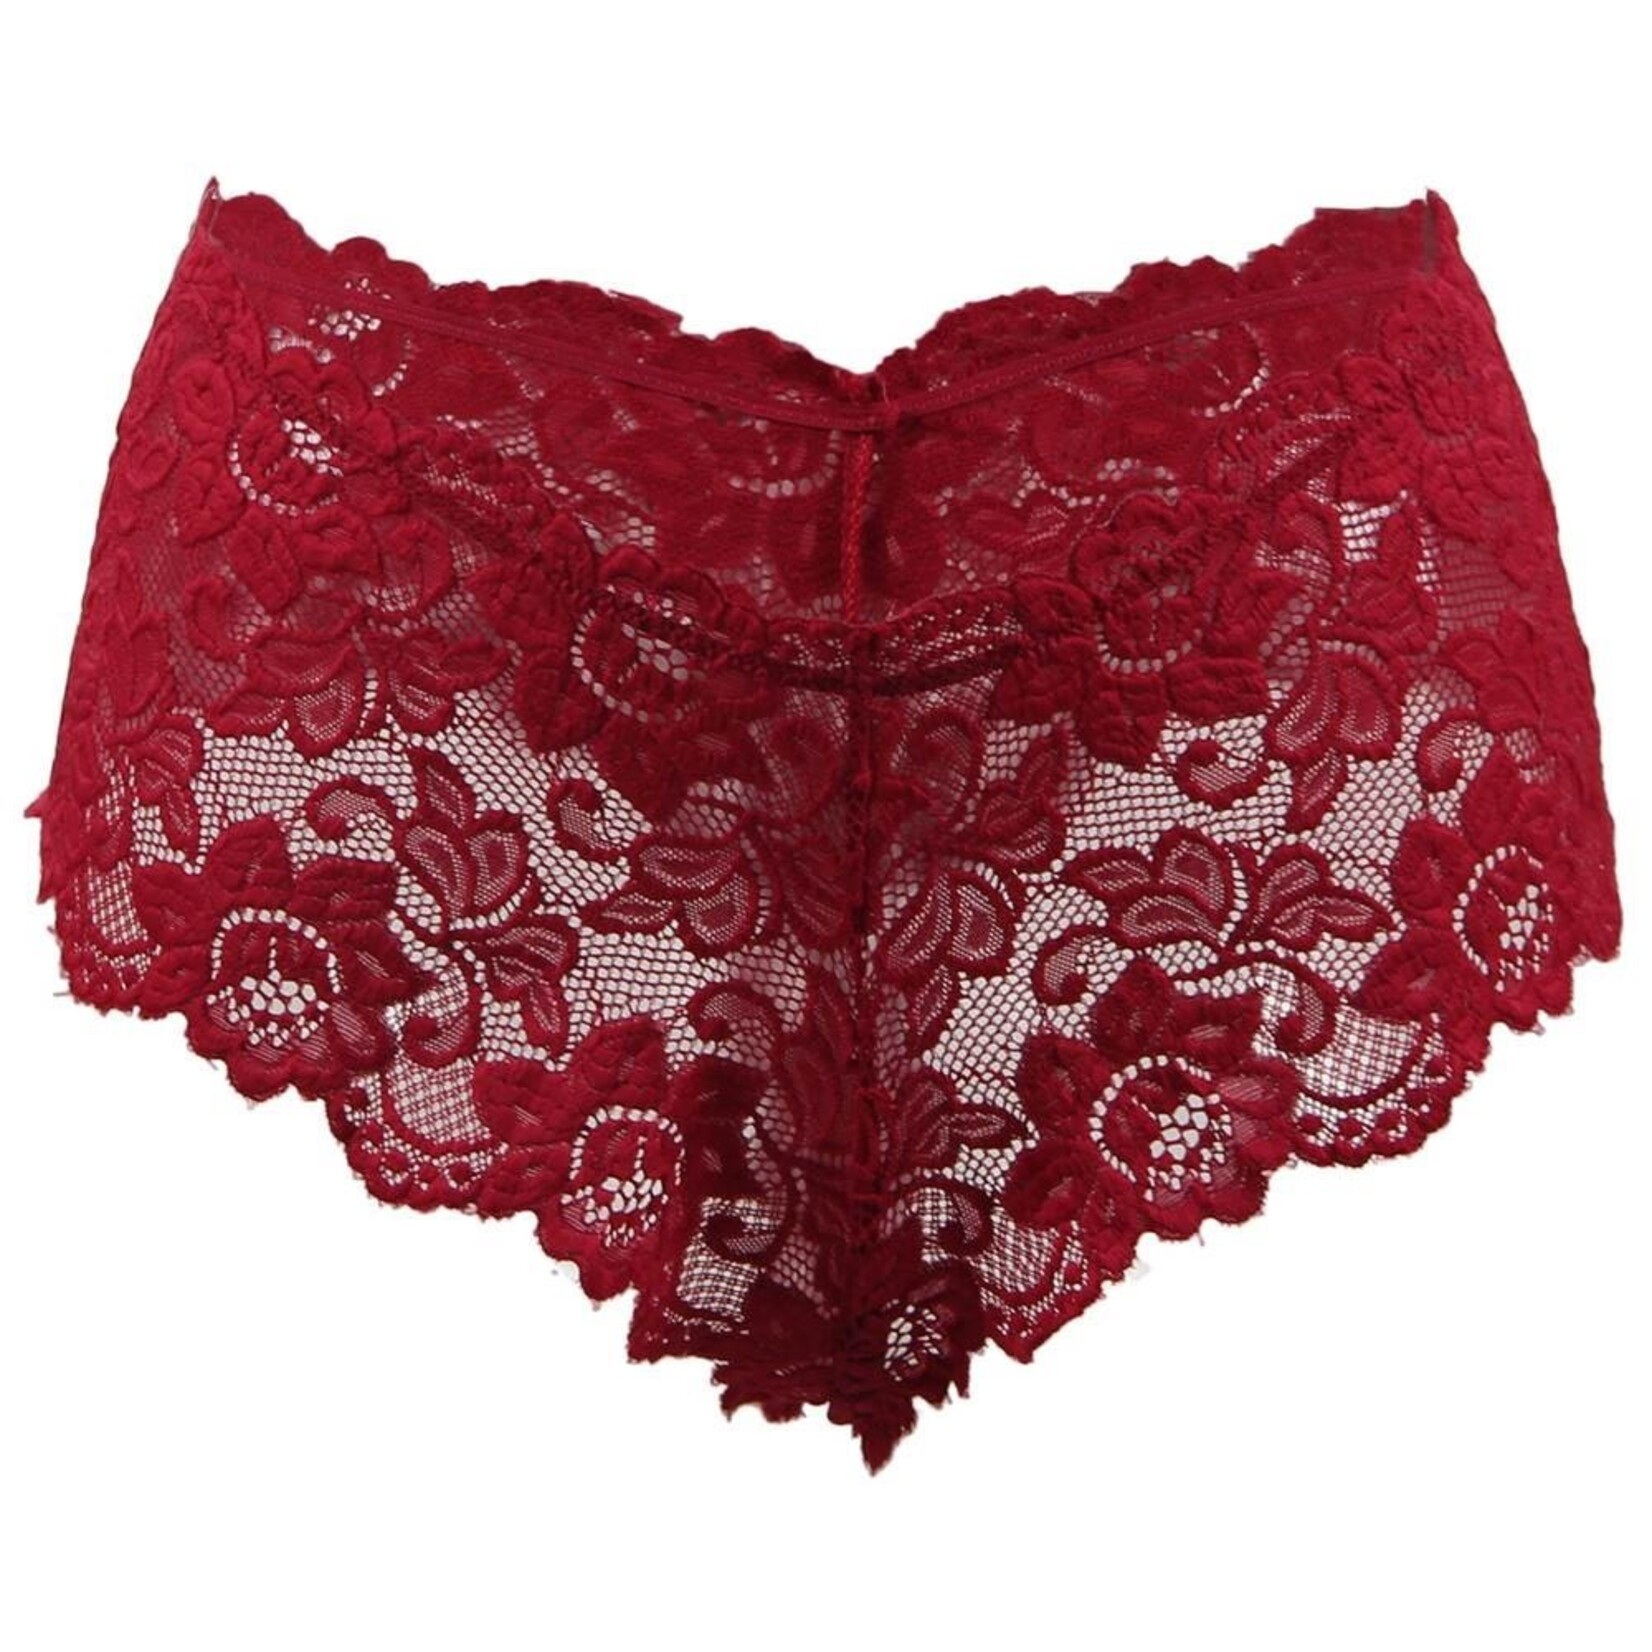 OH YEAH! -  RED SEXY FLORAL LACE PANTY S-M